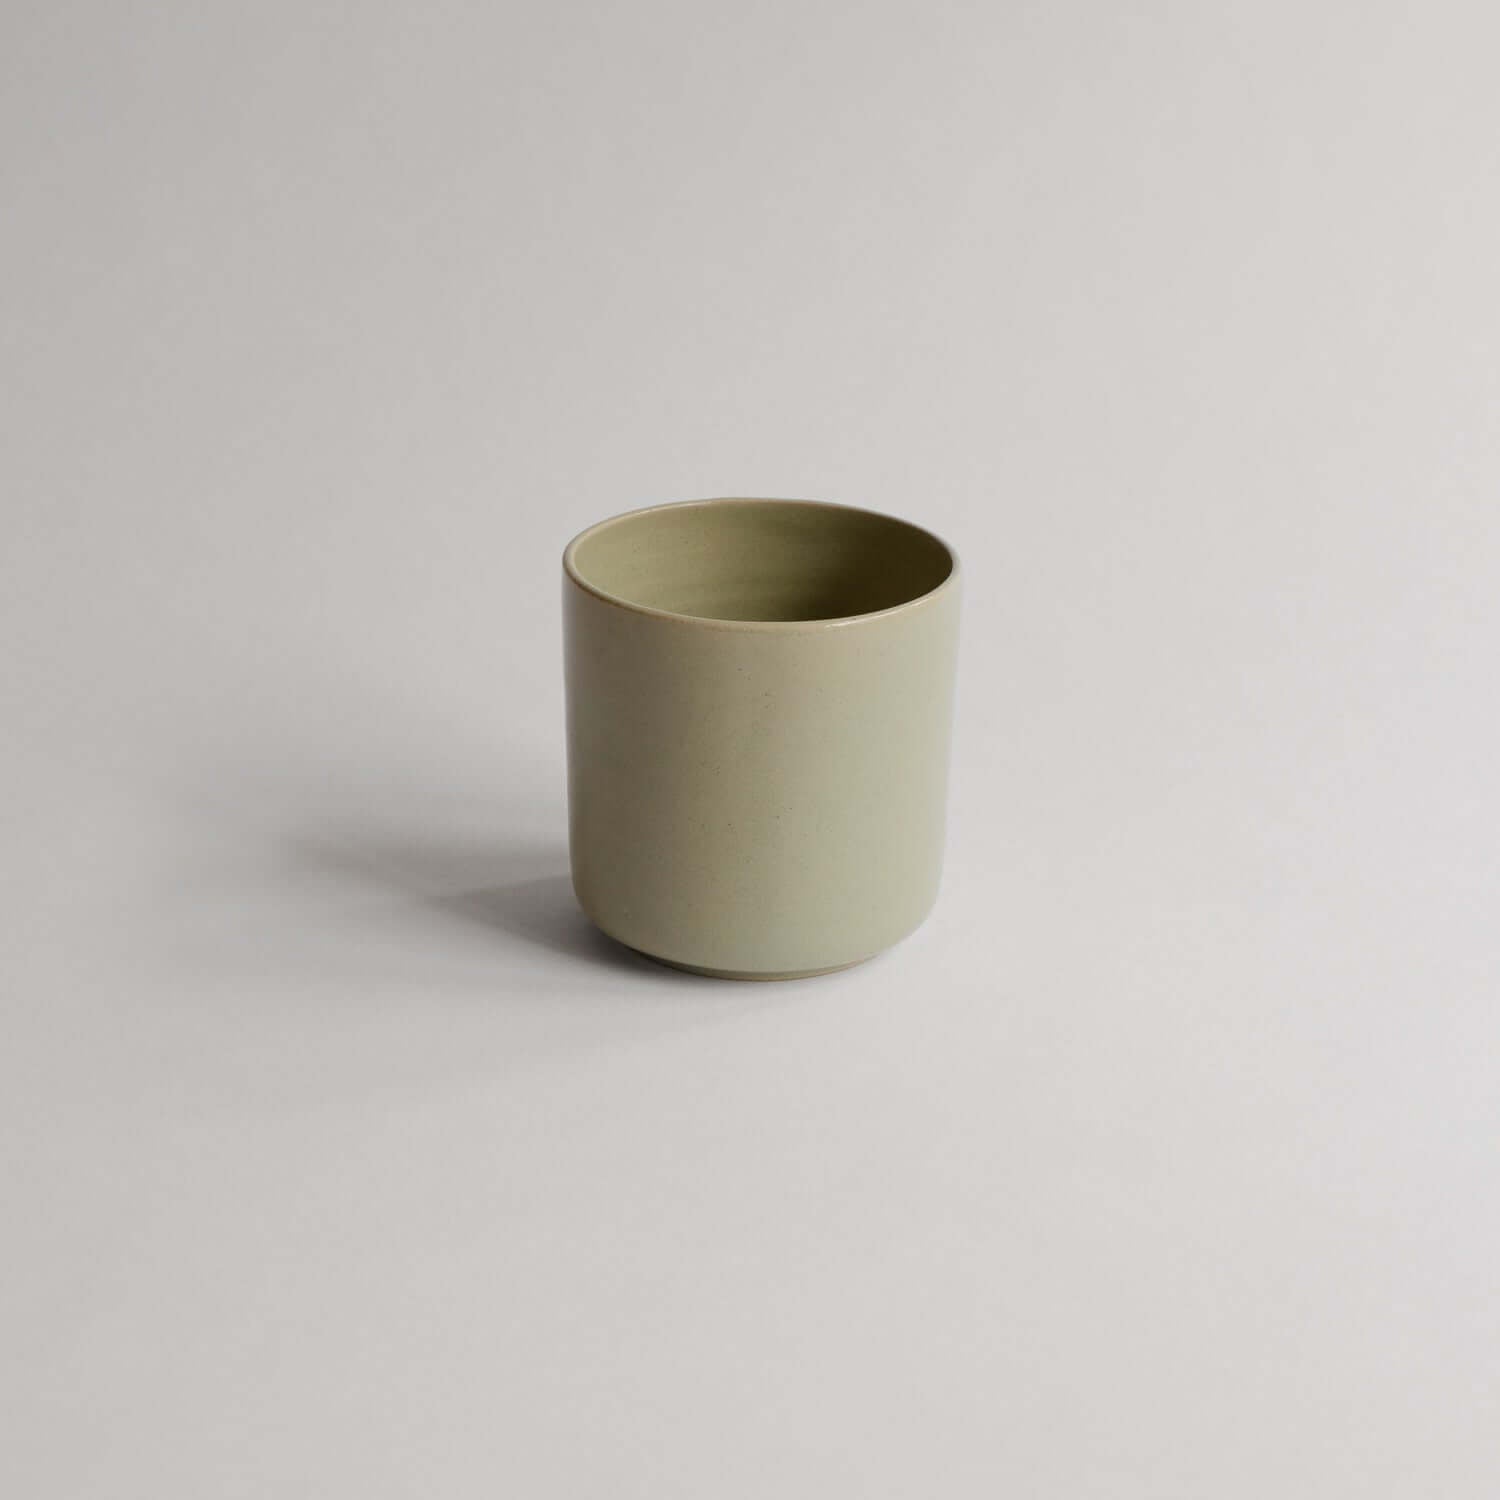 Shop our Tea Cup Nomi Moss. Handmade grey stoneware with a glossy finish, each unique in form and color. Holds 270ml. Perfect for tea lovers. von viola beuscher ceramics